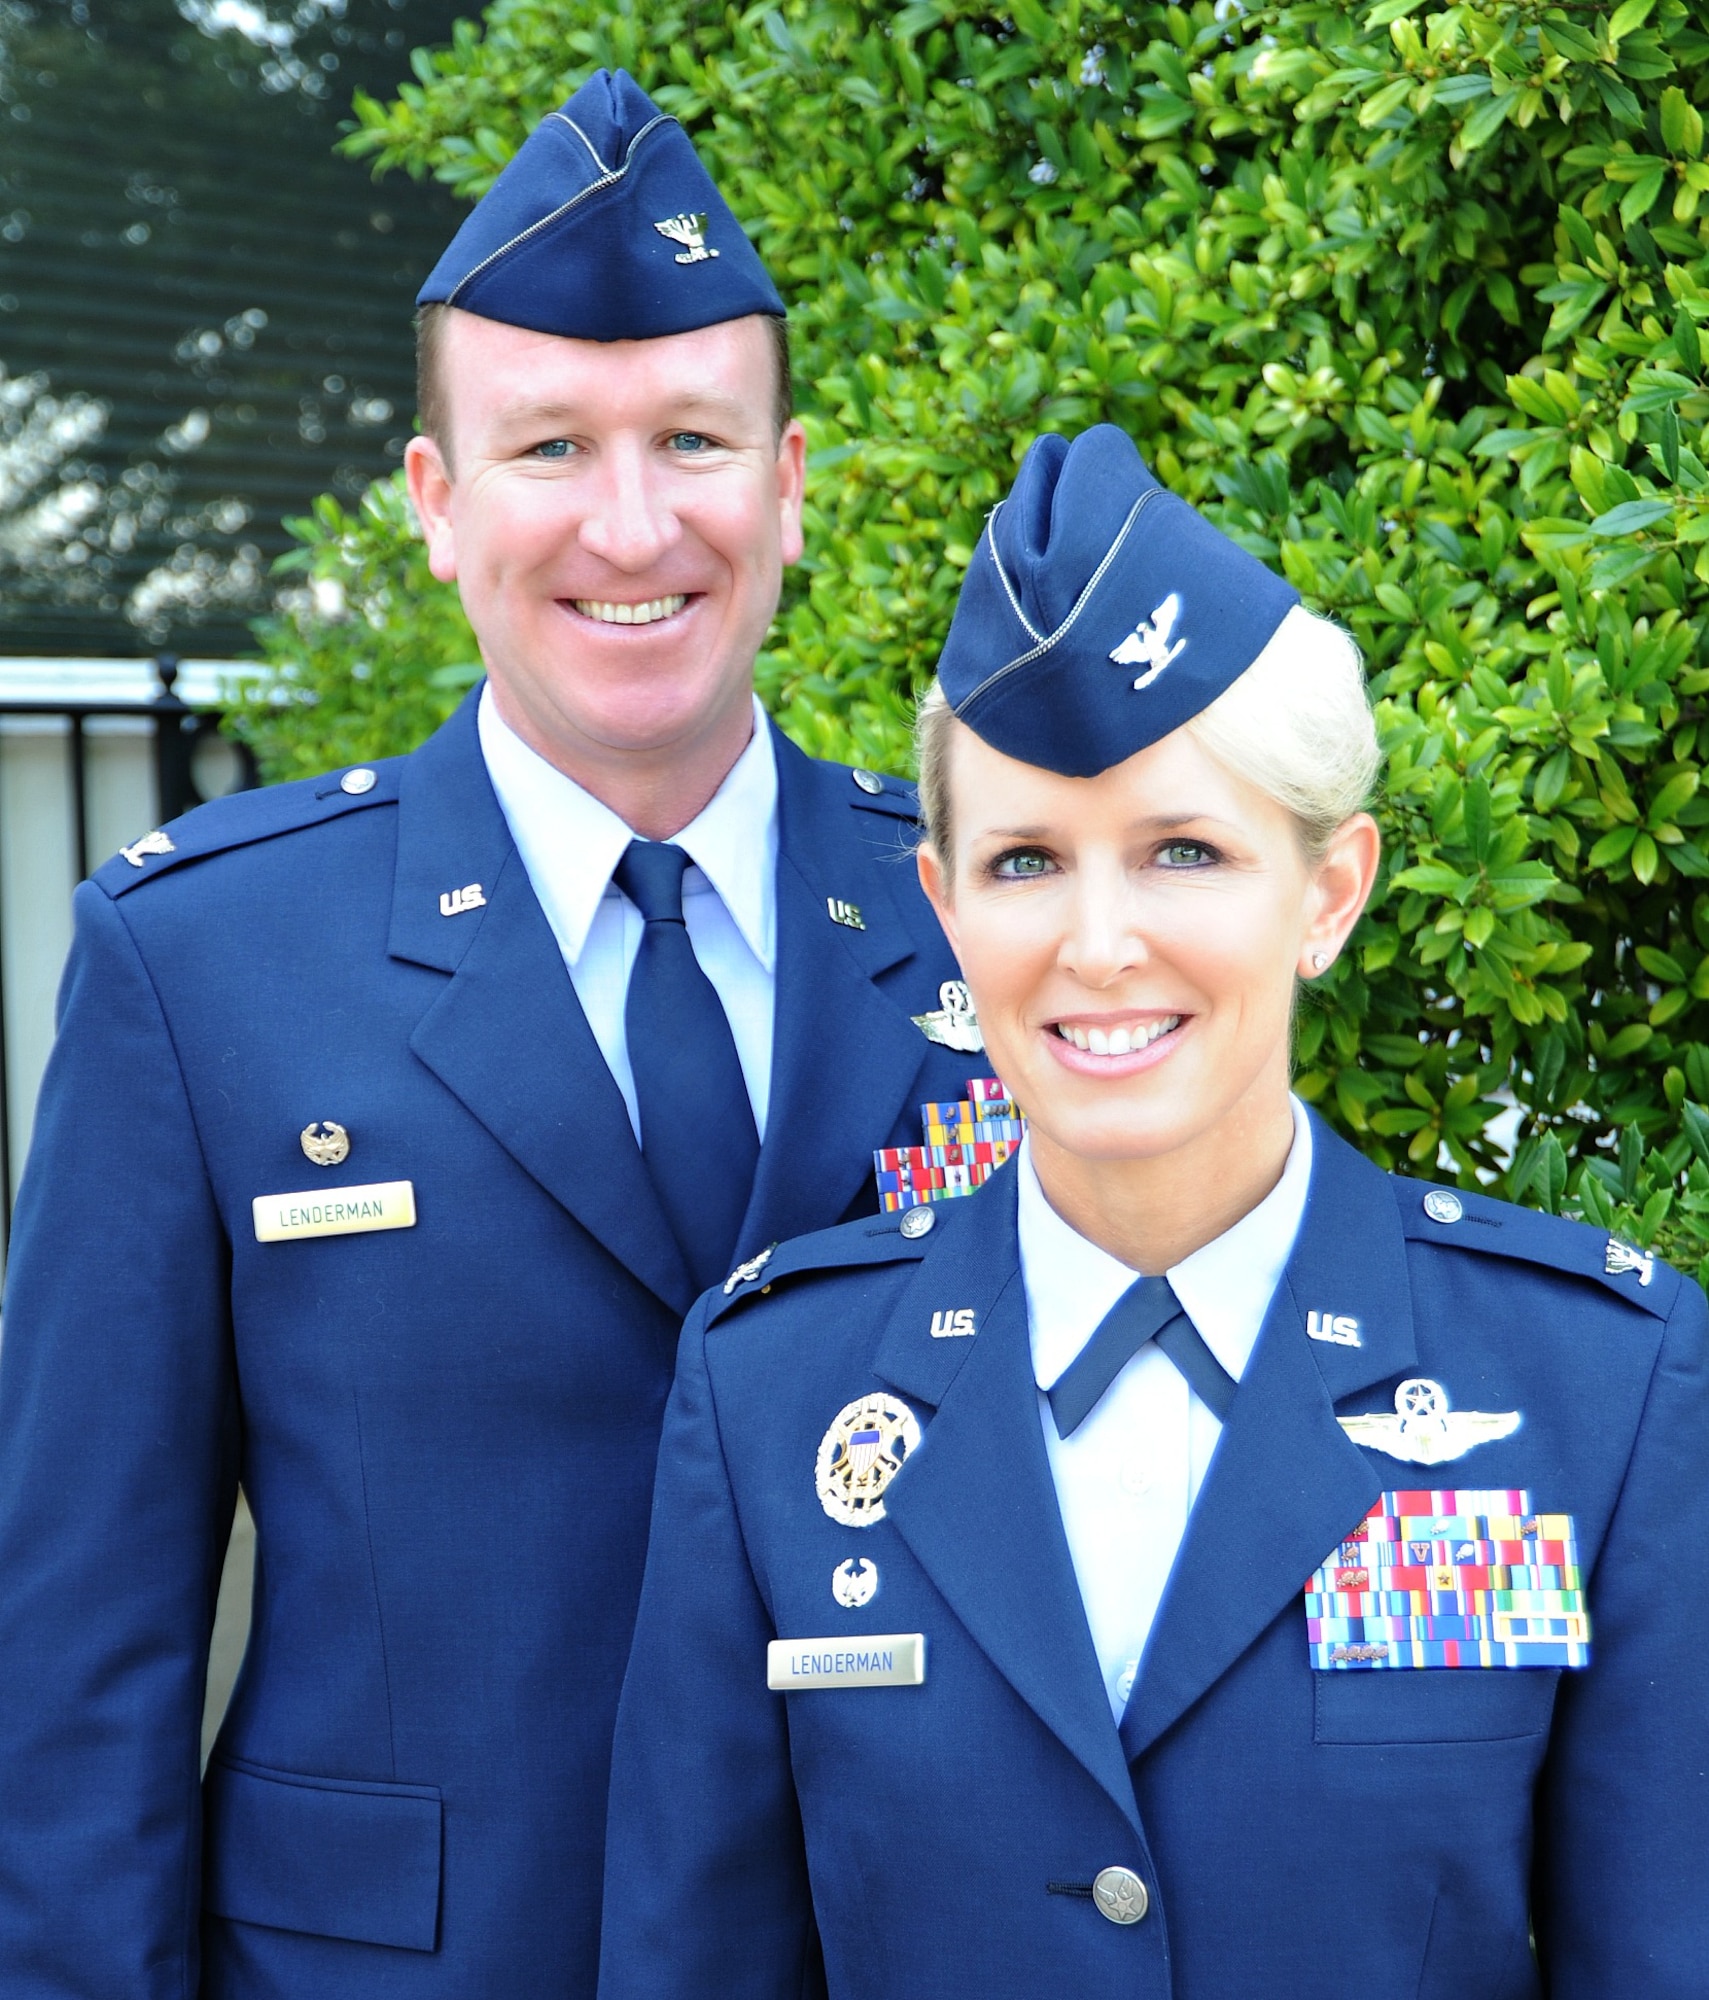 Col. Laura Lenderman, 375th Air Mobility Wing commander, said about her relationship with husband Col. Dave Lenderman, “I think one of the main advantages to being a dual military couple is having a mentor who is going through the same things as you are. You have someone who ‘gets it’ right there and who can give you the feedback that you might not get from your peers or subordinates. You need that honest feedback; you need to hear what is not always easy to hear. I’m married to my best friend, and I have my biggest cheerleader and coach right beside me.”